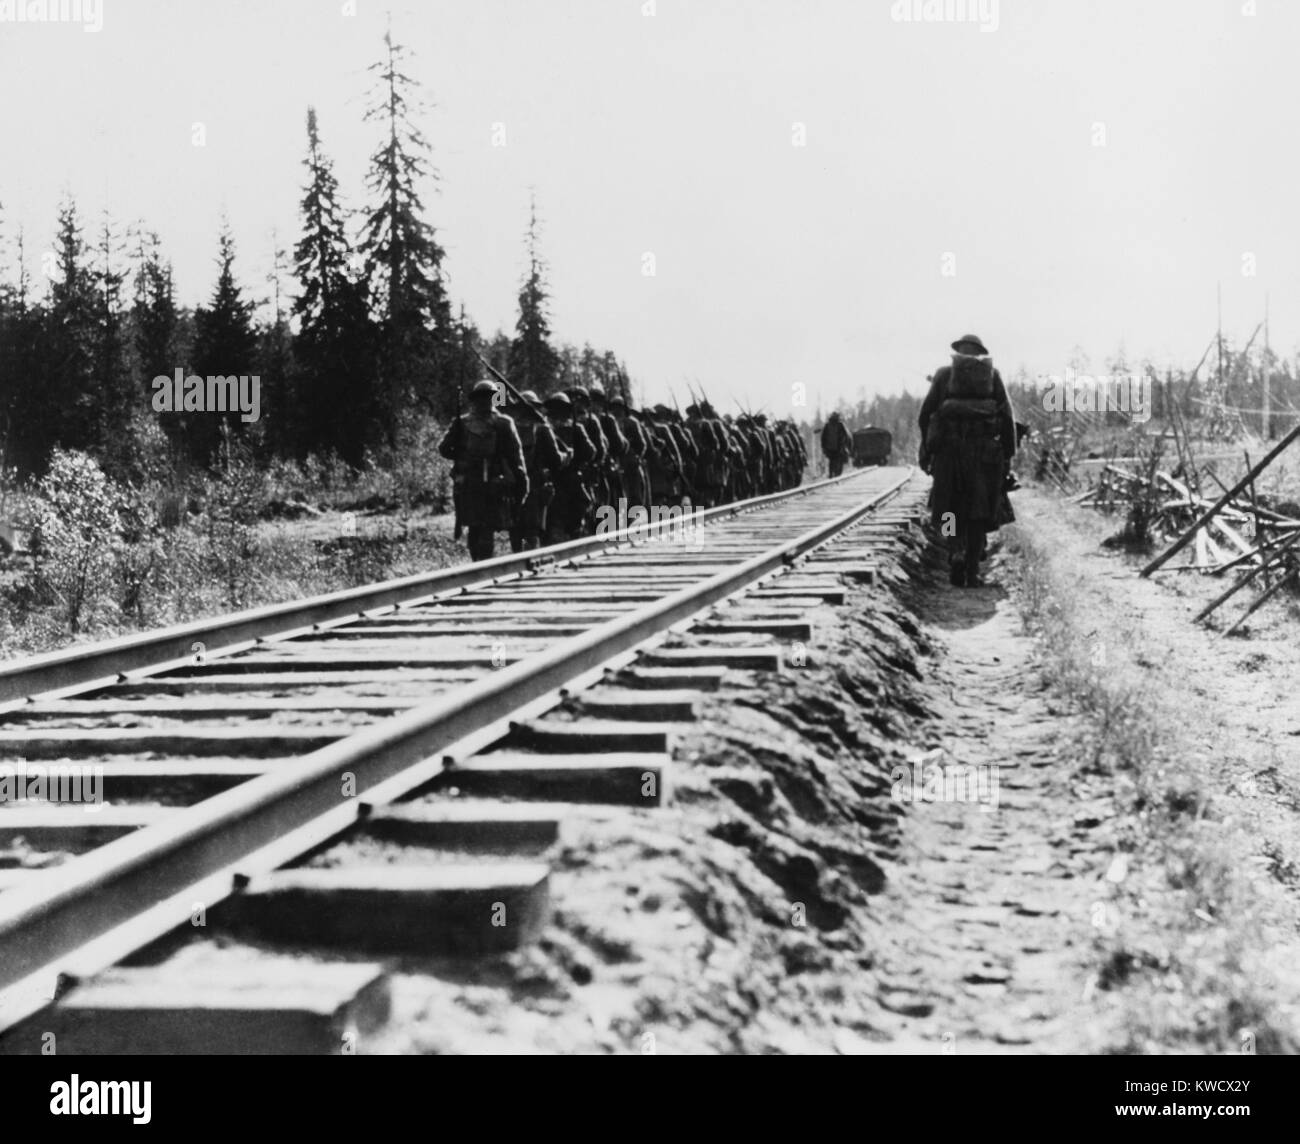 US Infantry, marching along railway lines during the Russian Intervention, 1918-20. Their mission was to protect the Siberian Railway while maintaining American neutrality during Russian Revolution and Civil War (BSLOC 2017 2 12) Stock Photo